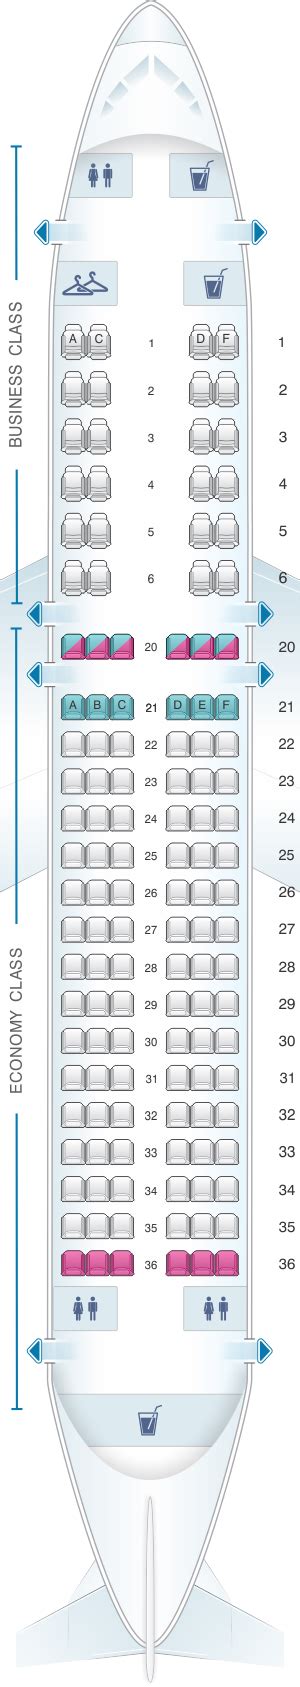 Airbus A Seating Map